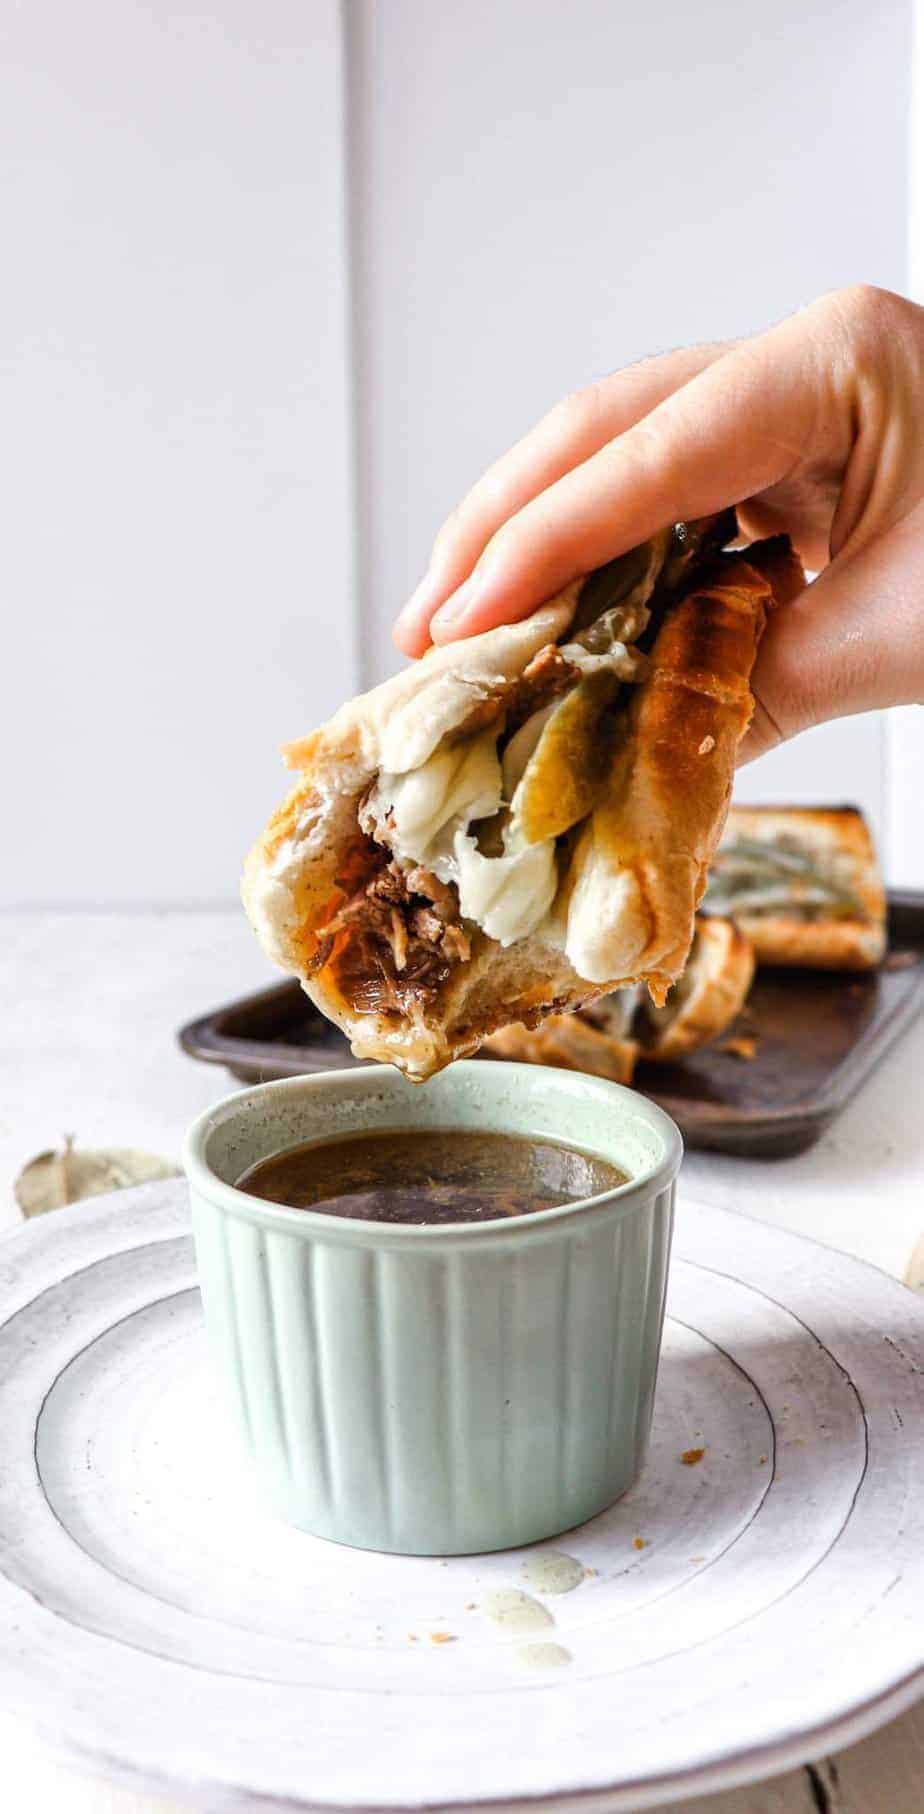 hand holding a beef sandwich that has a bite taken out of it and is being dipped into a ramekin of au jus.